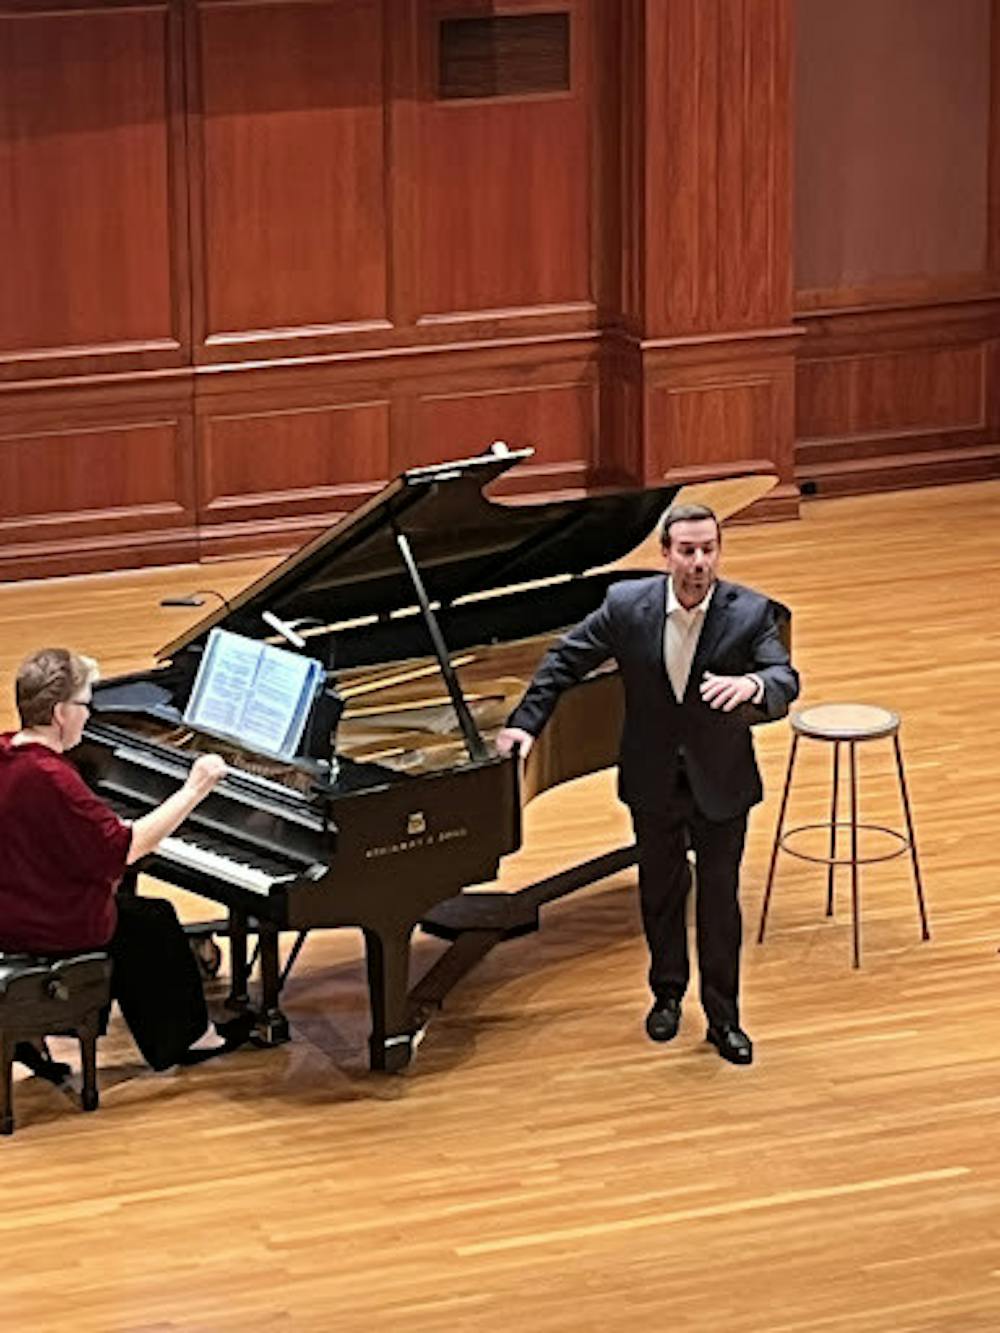 <p>Pianist Laura Ward (pictured left) plays piano while Steven Eddy (pictured right) sings on stage (Photo courtesy of Jayleen Rolon).<br/><br/></p>